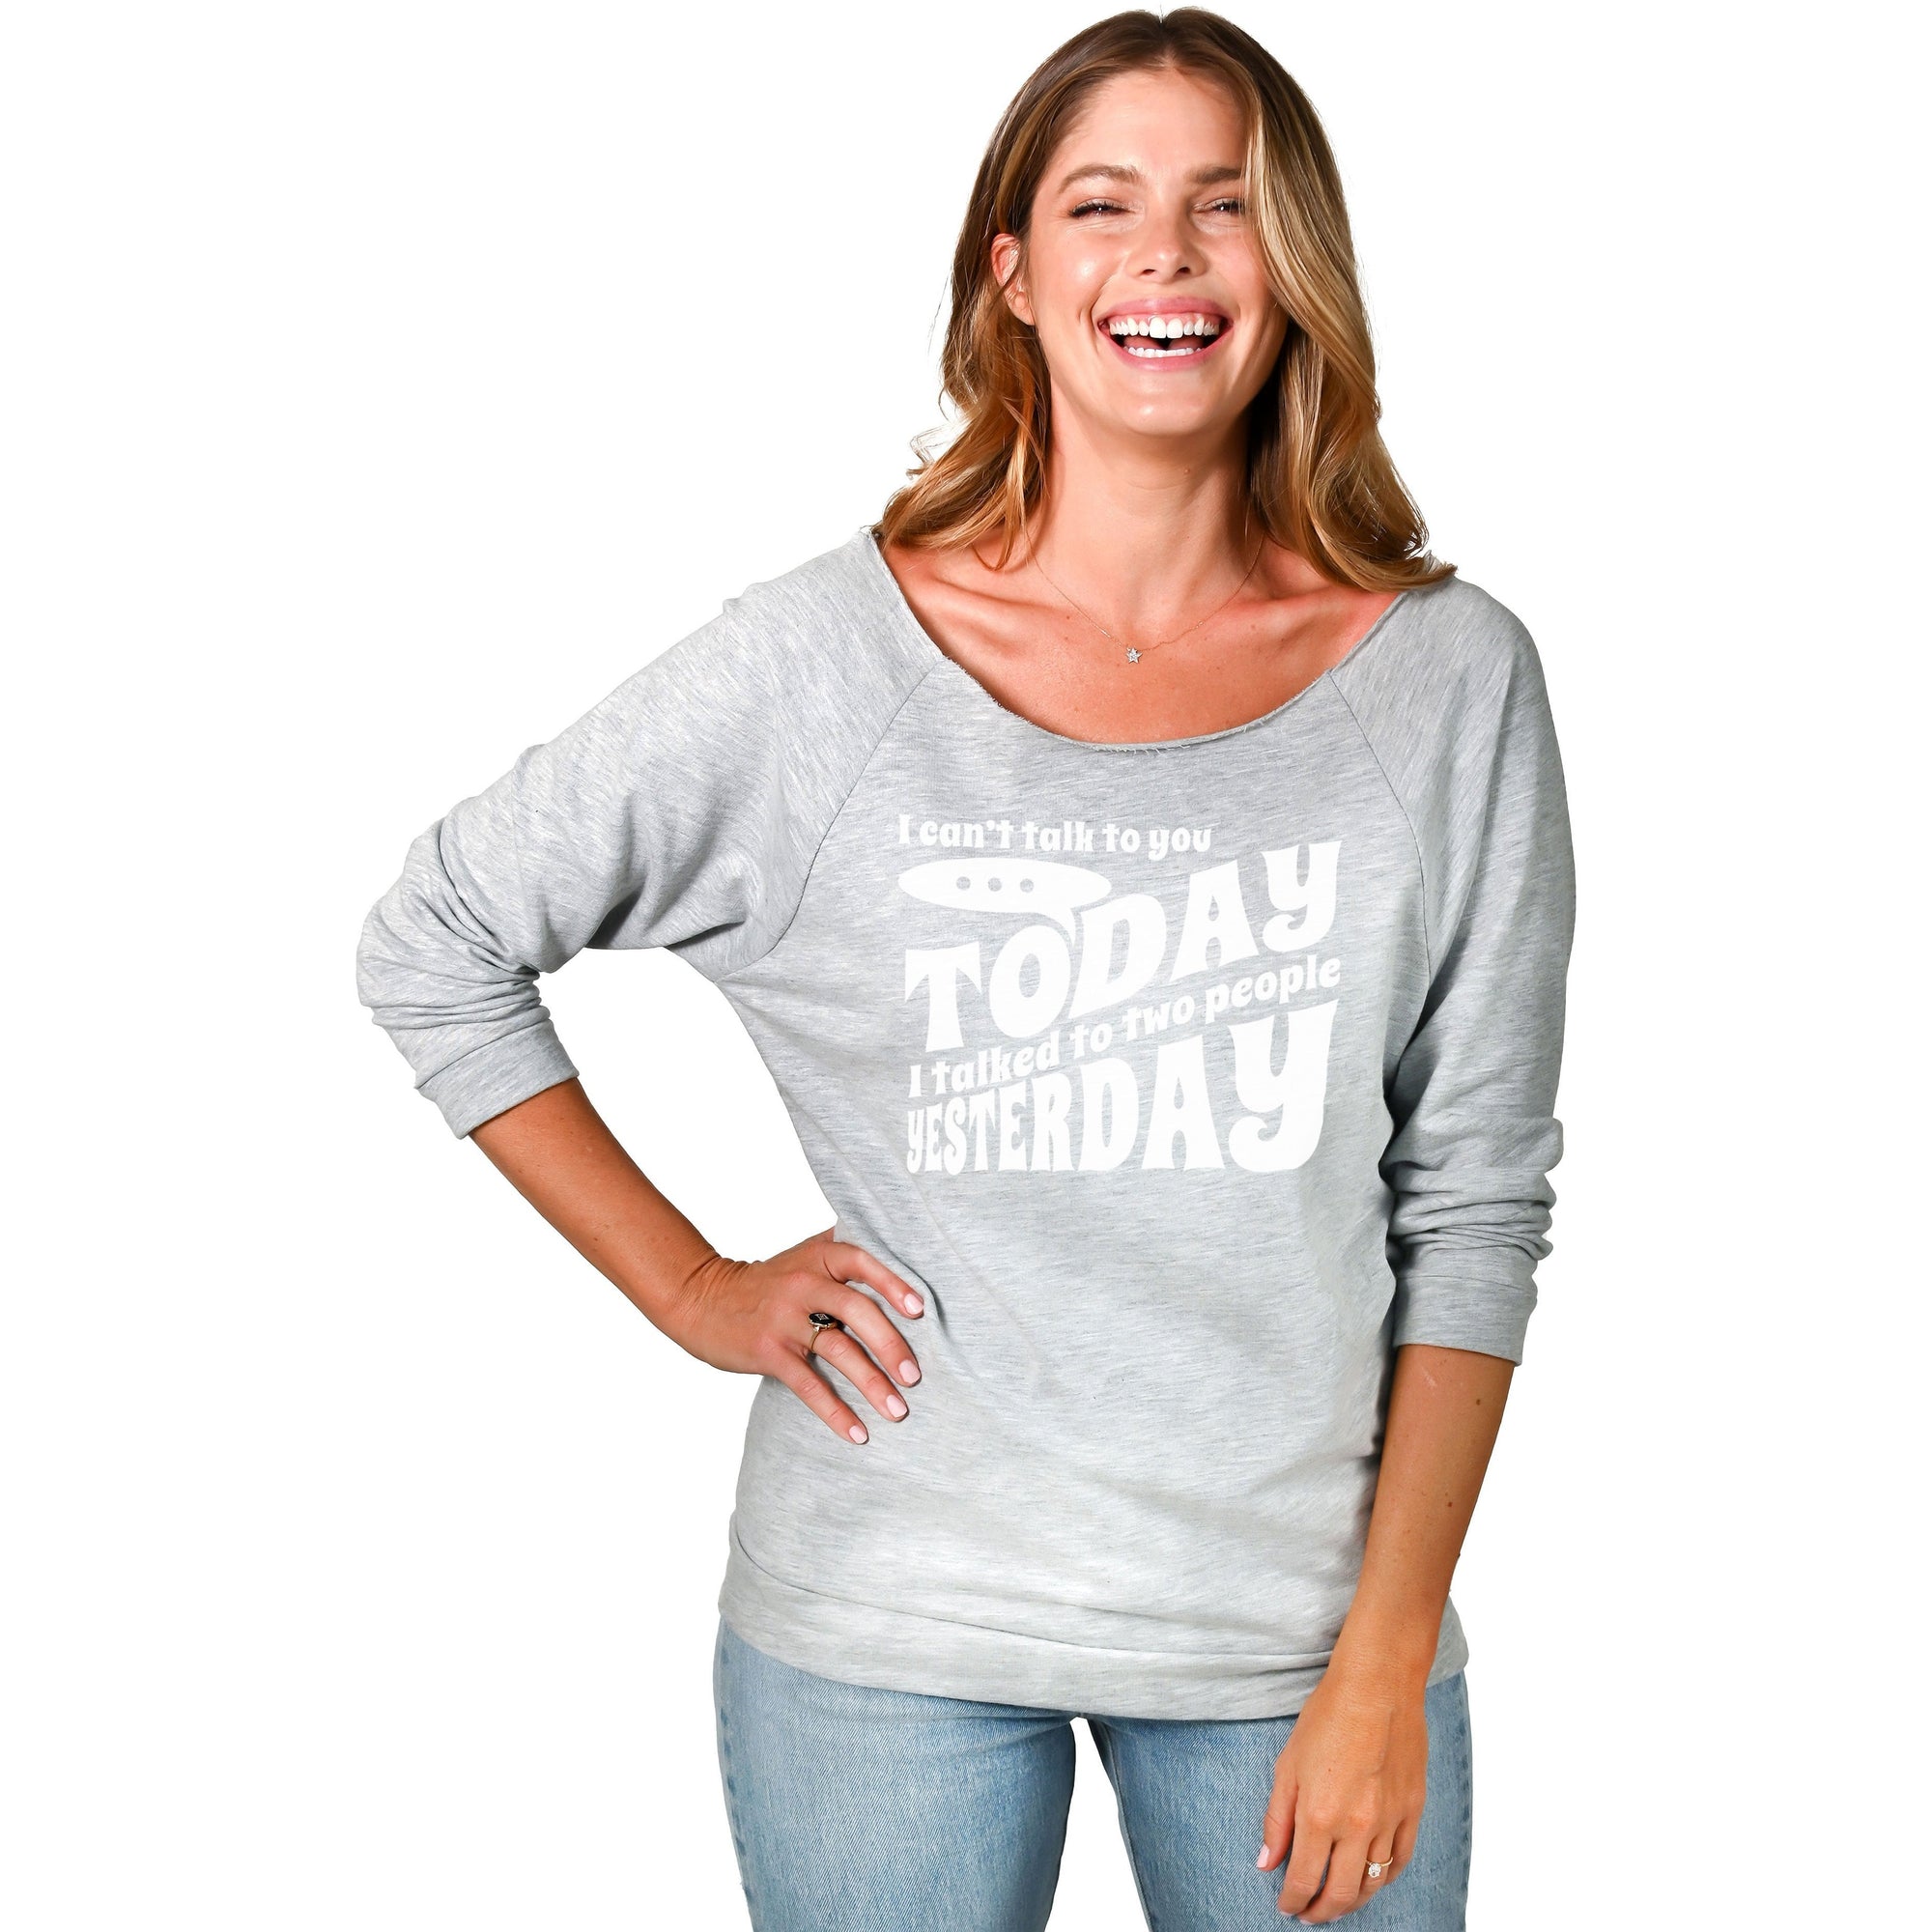 I Can't Talk To You TODAY I Talked To Two People Yesterday - threadtank | stories you can wear